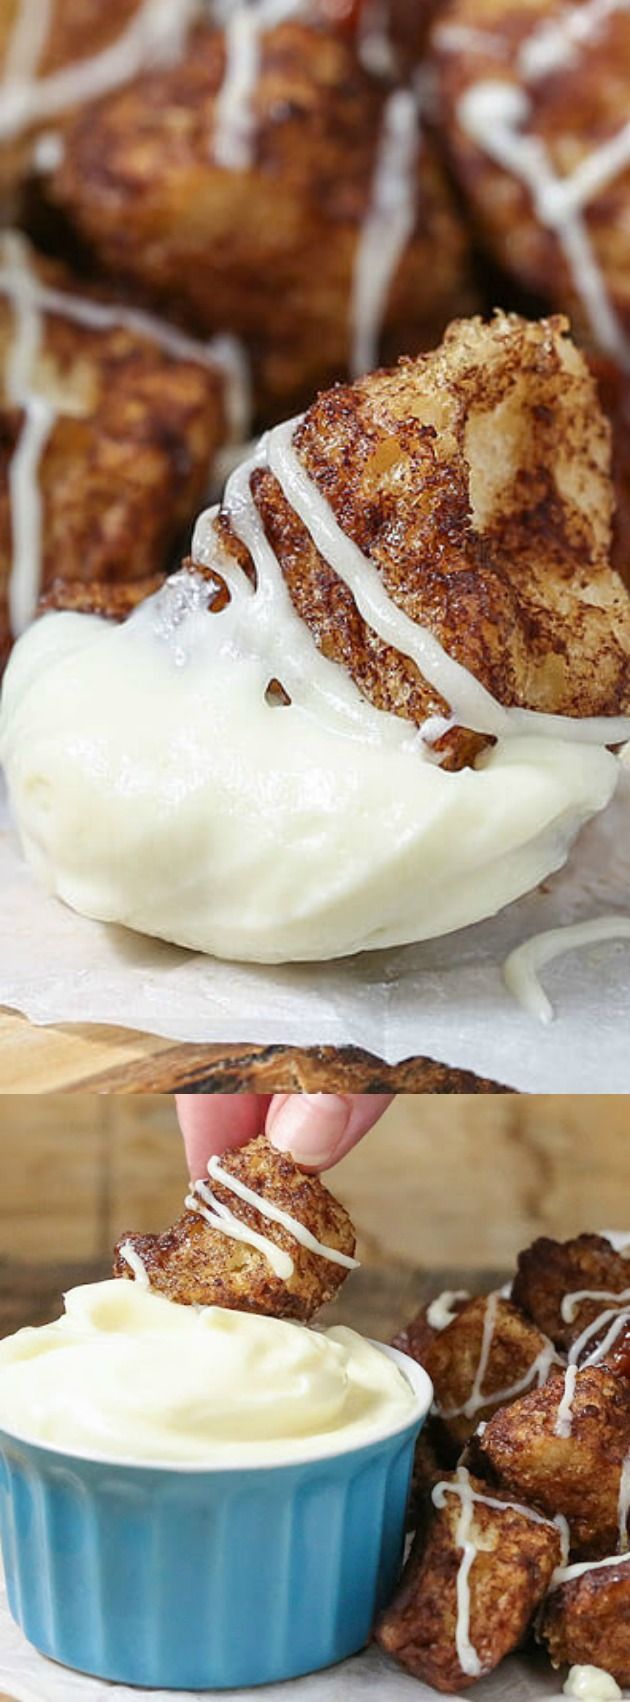 This Slow Cooker Cinnamon Roll Pull Apart Bread from The Slow Roasted Italian is not only delicious, but it is SO simple to make